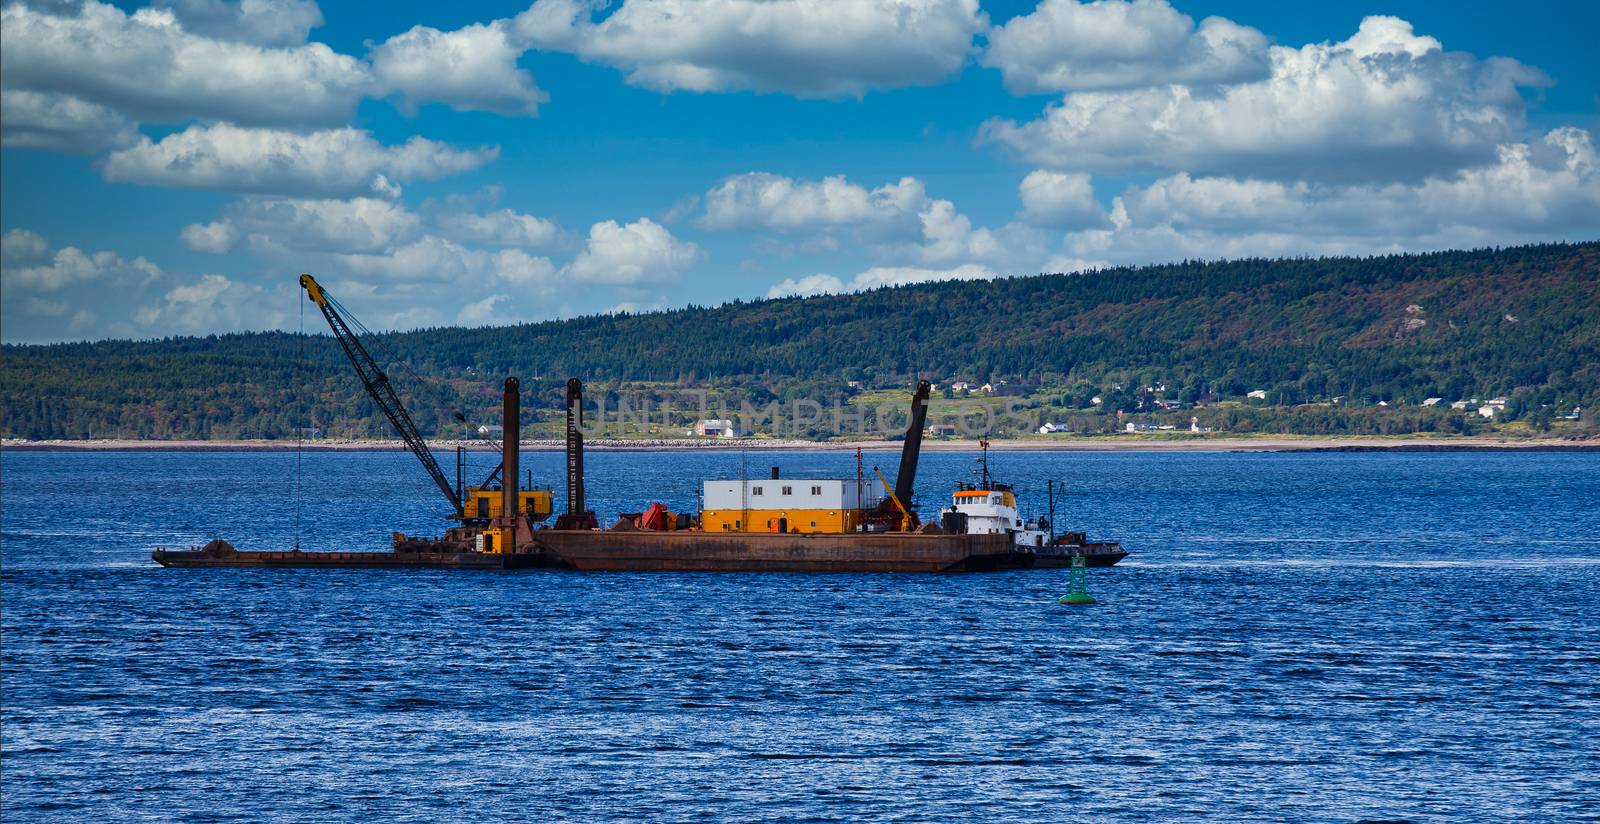 Working Barge on Canadian Channel by dbvirago